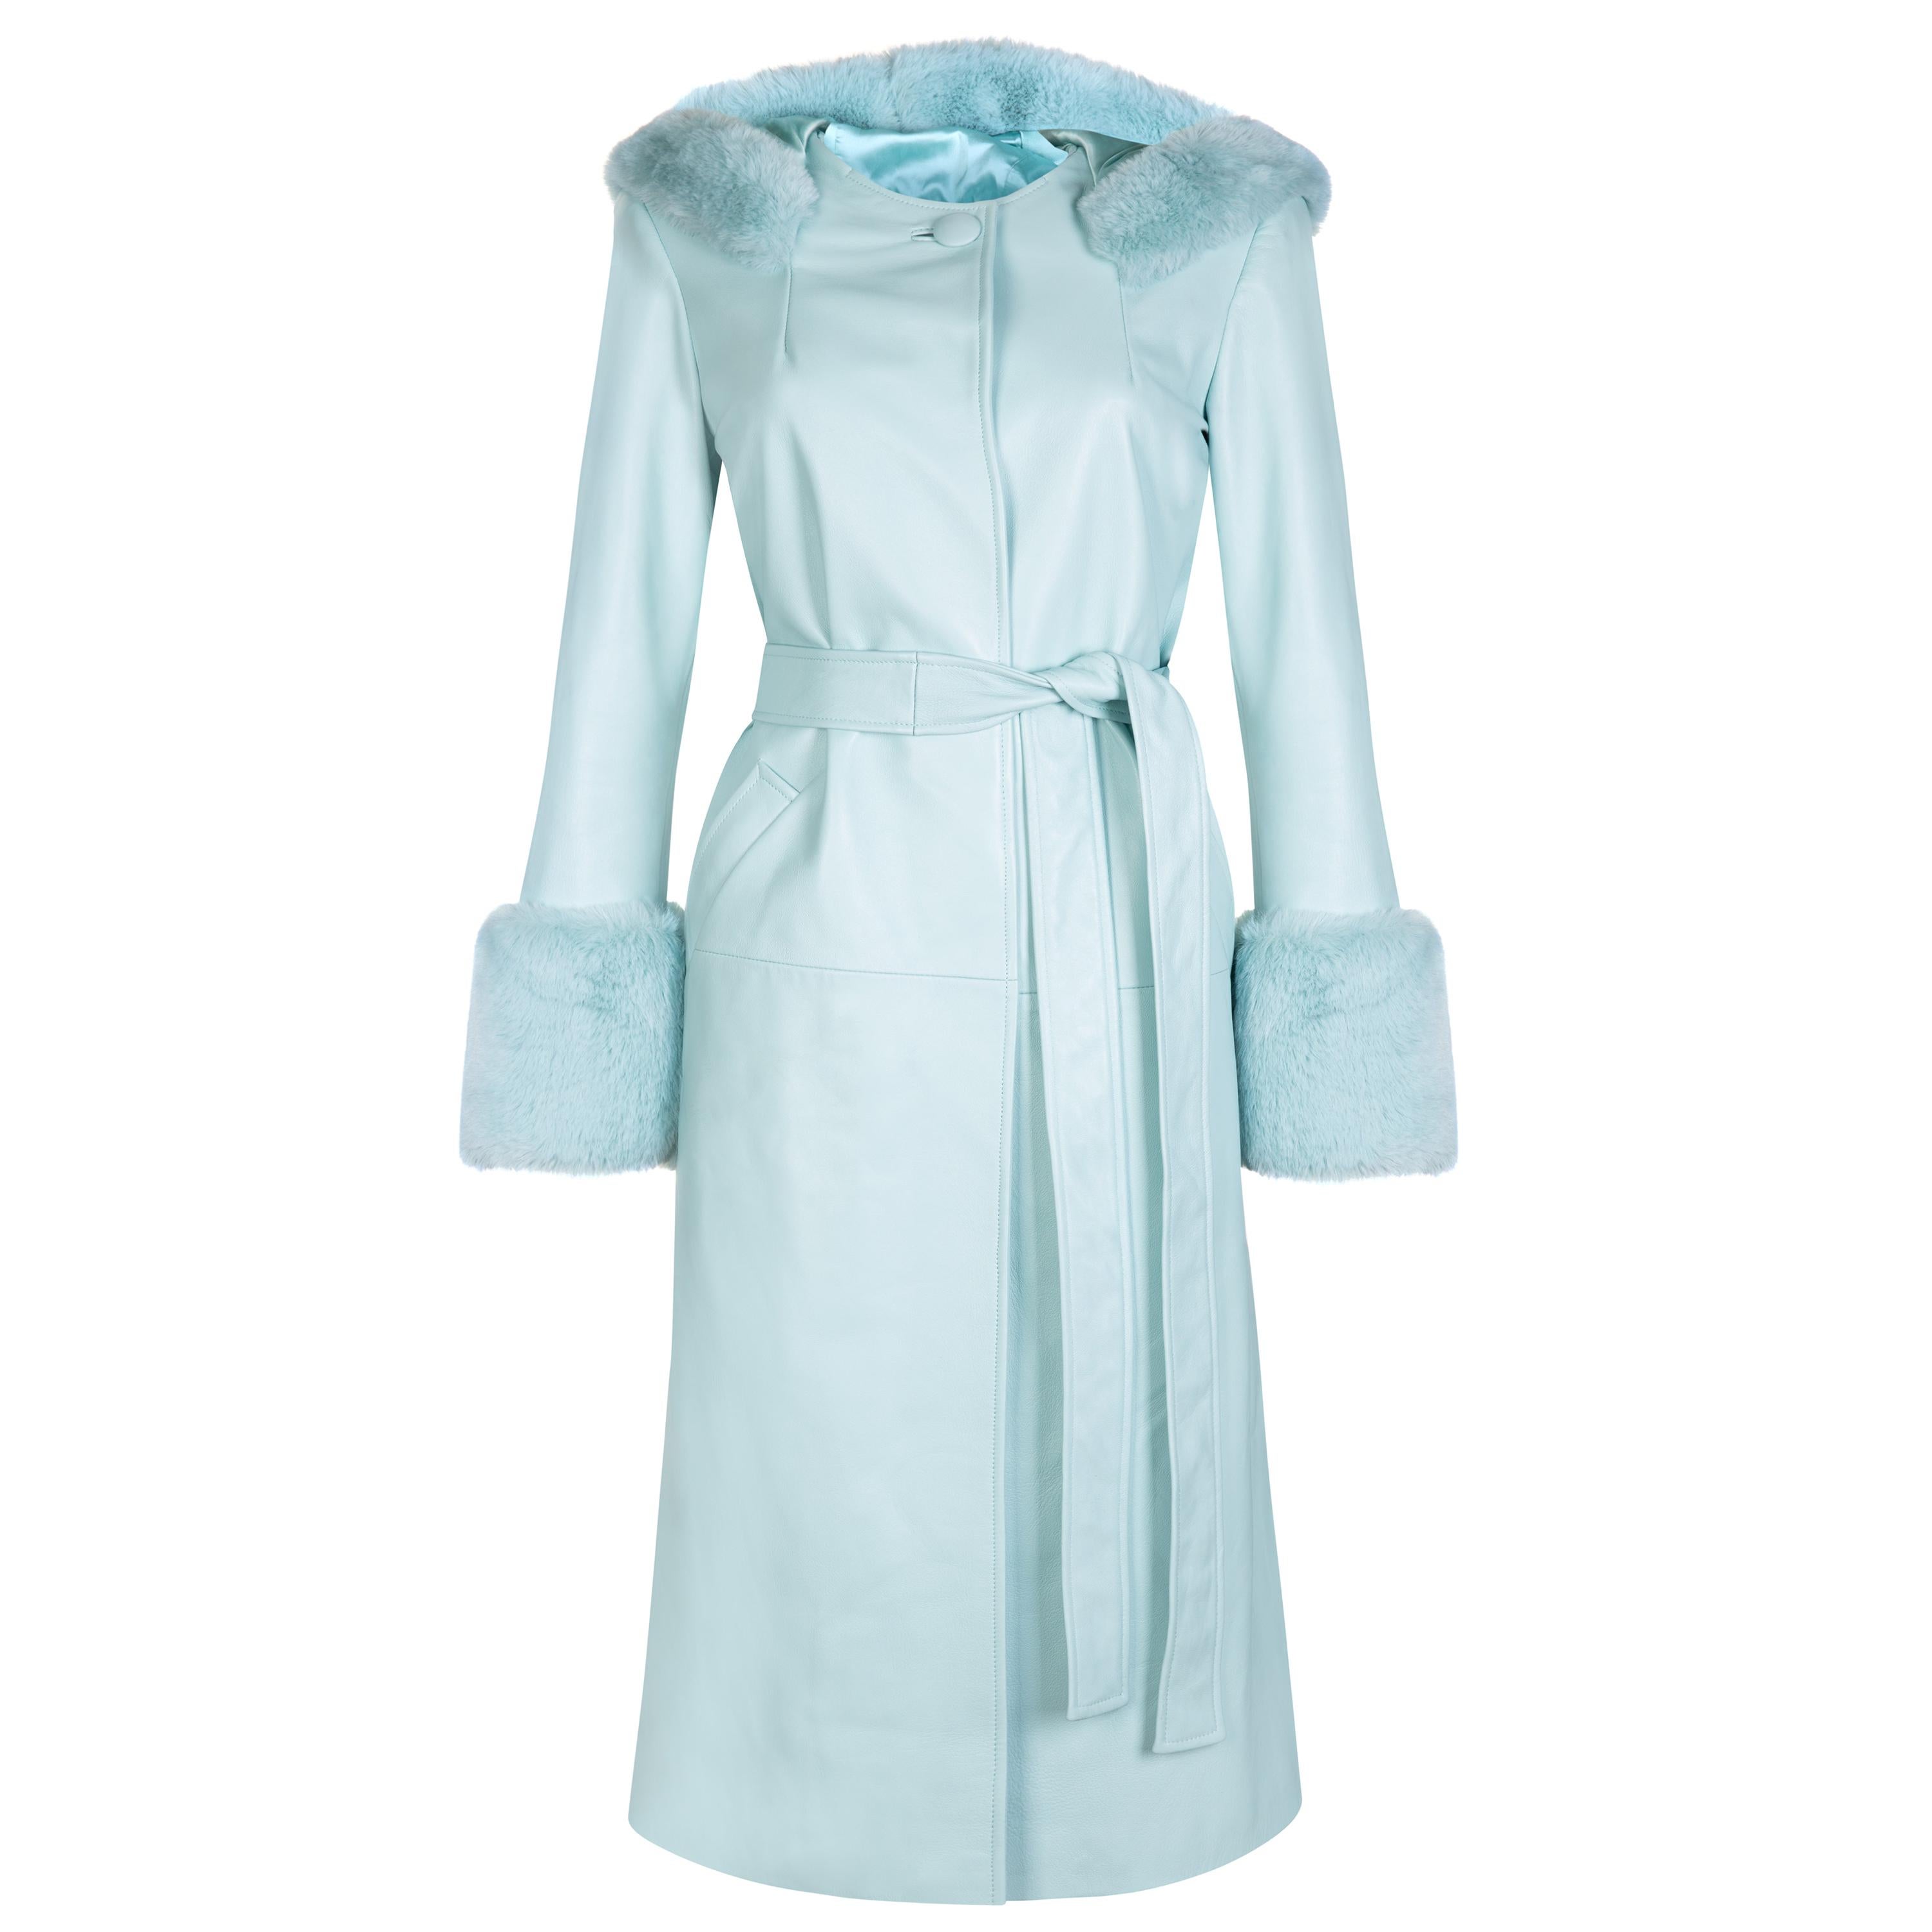 Verheyen London Hooded Leather Trench Coat in Blue with Faux Fur - Size uk 16